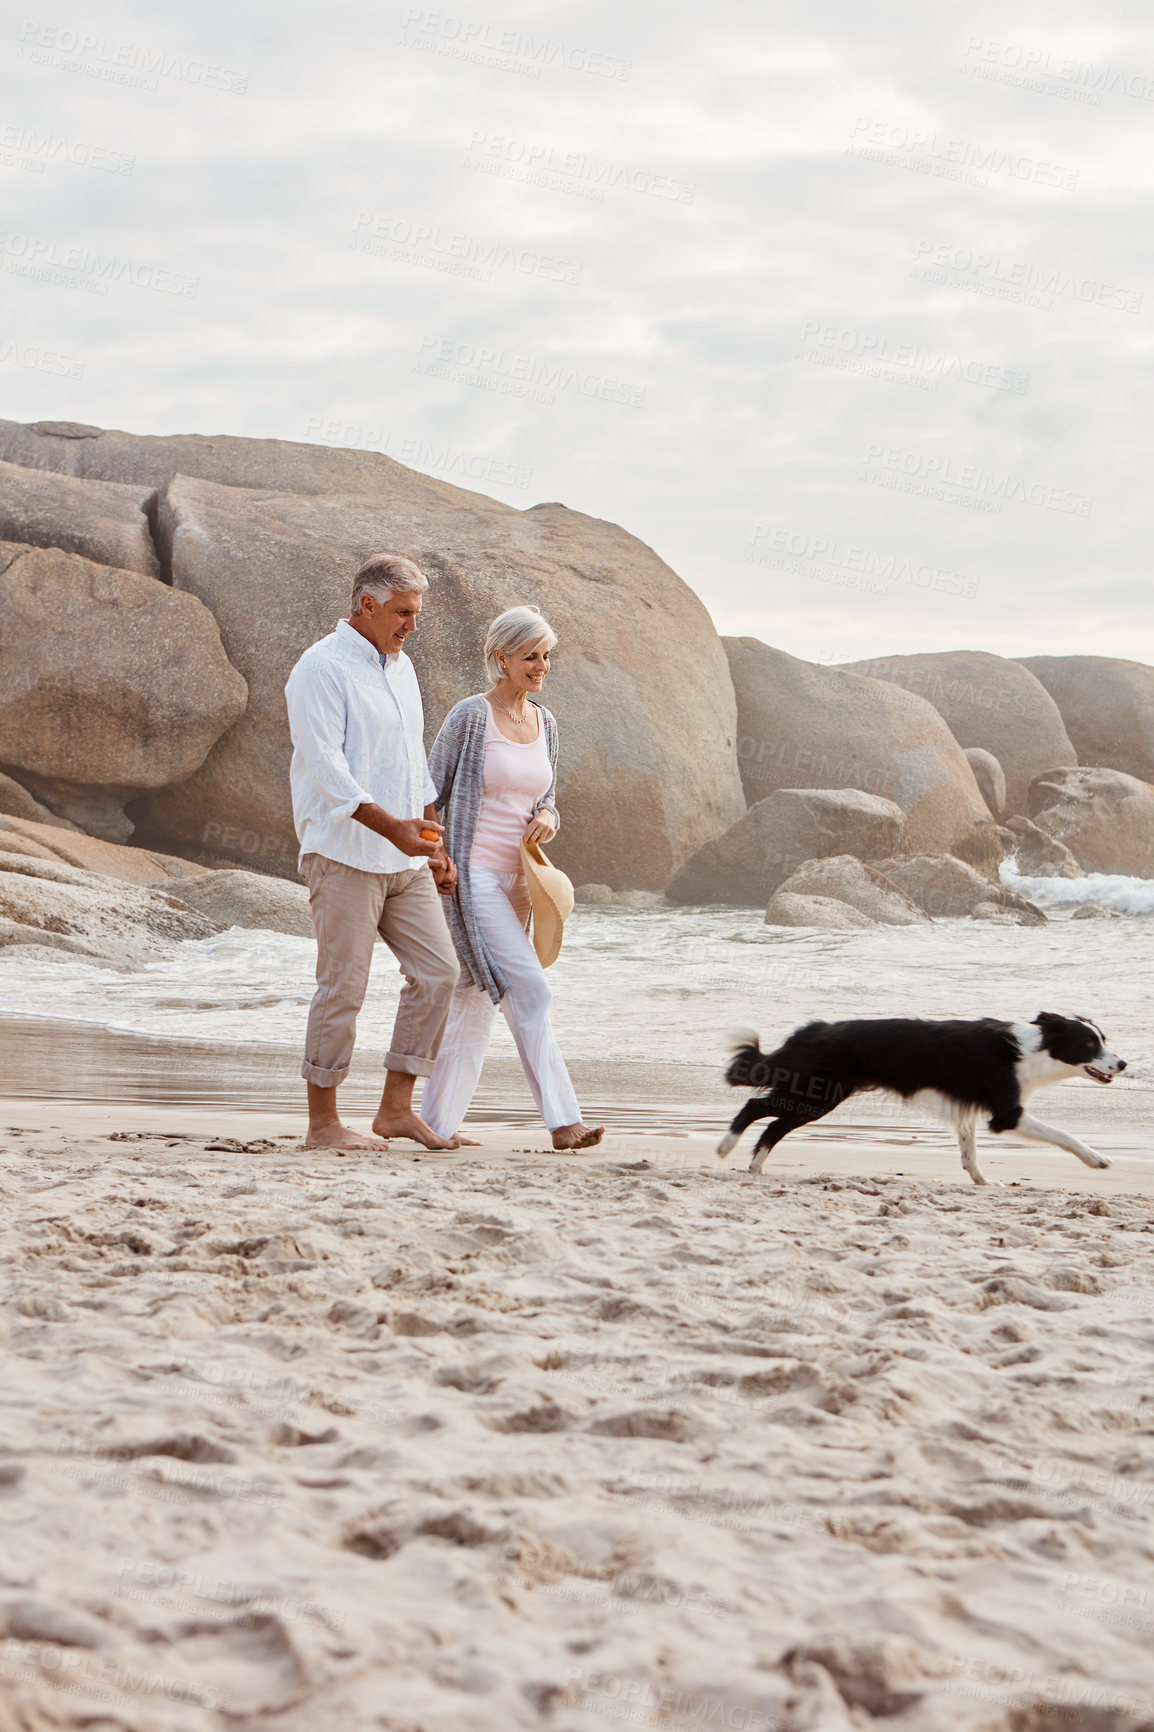 Buy stock photo Full length shot of an affectionate middle aged couple walking hand in hand with along the beach with their dog